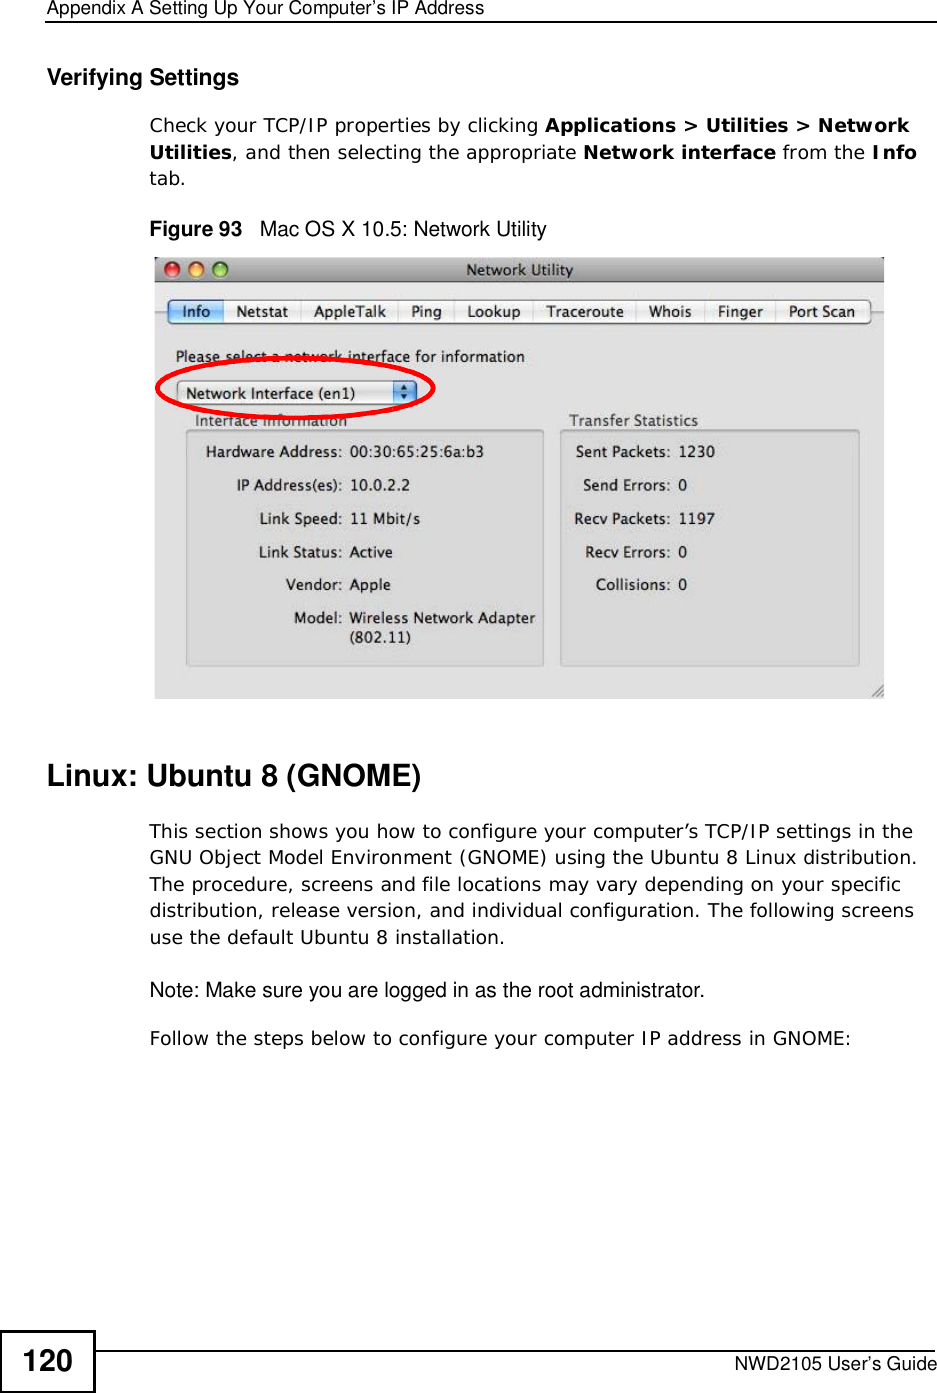 Appendix ASetting Up Your Computer’s IP AddressNWD2105 User’s Guide120Verifying SettingsCheck your TCP/IP properties by clicking Applications &gt; Utilities &gt; Network Utilities, and then selecting the appropriate Network interface from the Infotab.Figure 93   Mac OS X 10.5: Network UtilityLinux: Ubuntu 8 (GNOME)This section shows you how to configure your computer’s TCP/IP settings in the GNU Object Model Environment (GNOME) using the Ubuntu 8 Linux distribution. The procedure, screens and file locations may vary depending on your specific distribution, release version, and individual configuration. The following screens use the default Ubuntu 8 installation.Note: Make sure you are logged in as the root administrator. Follow the steps below to configure your computer IP address in GNOME: 